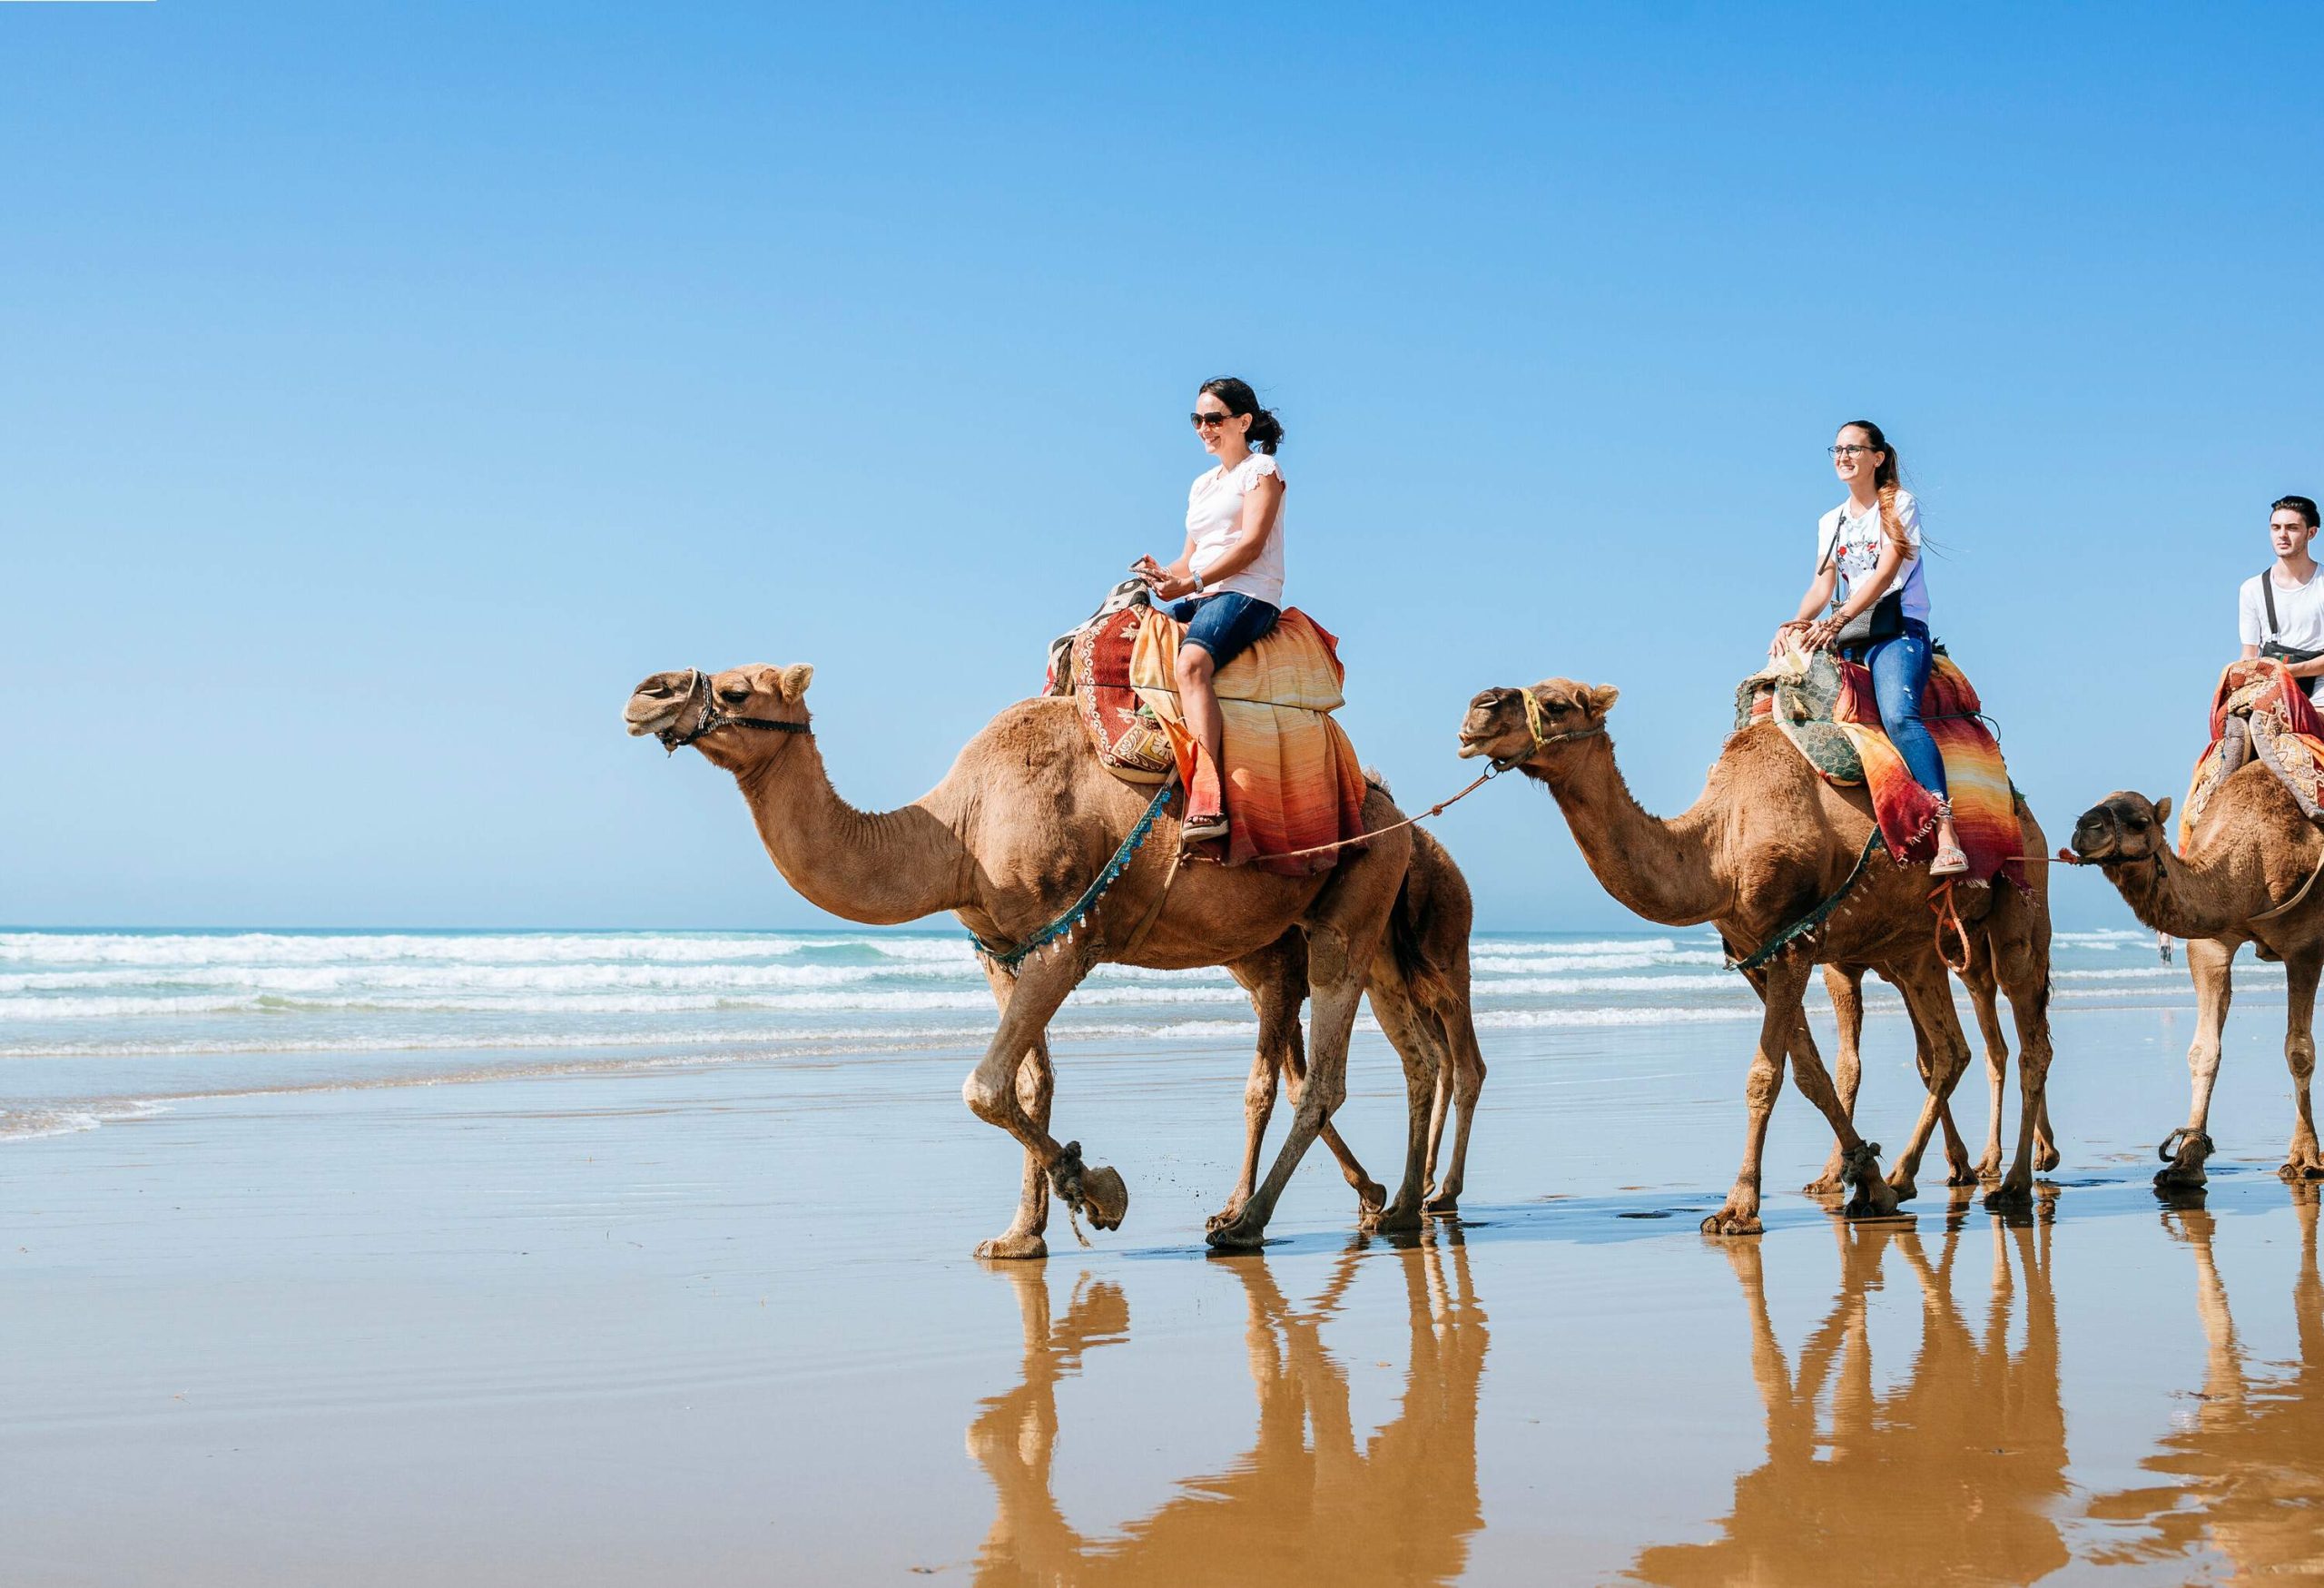 Three people riding camels along a wet beach under a clear open sky.